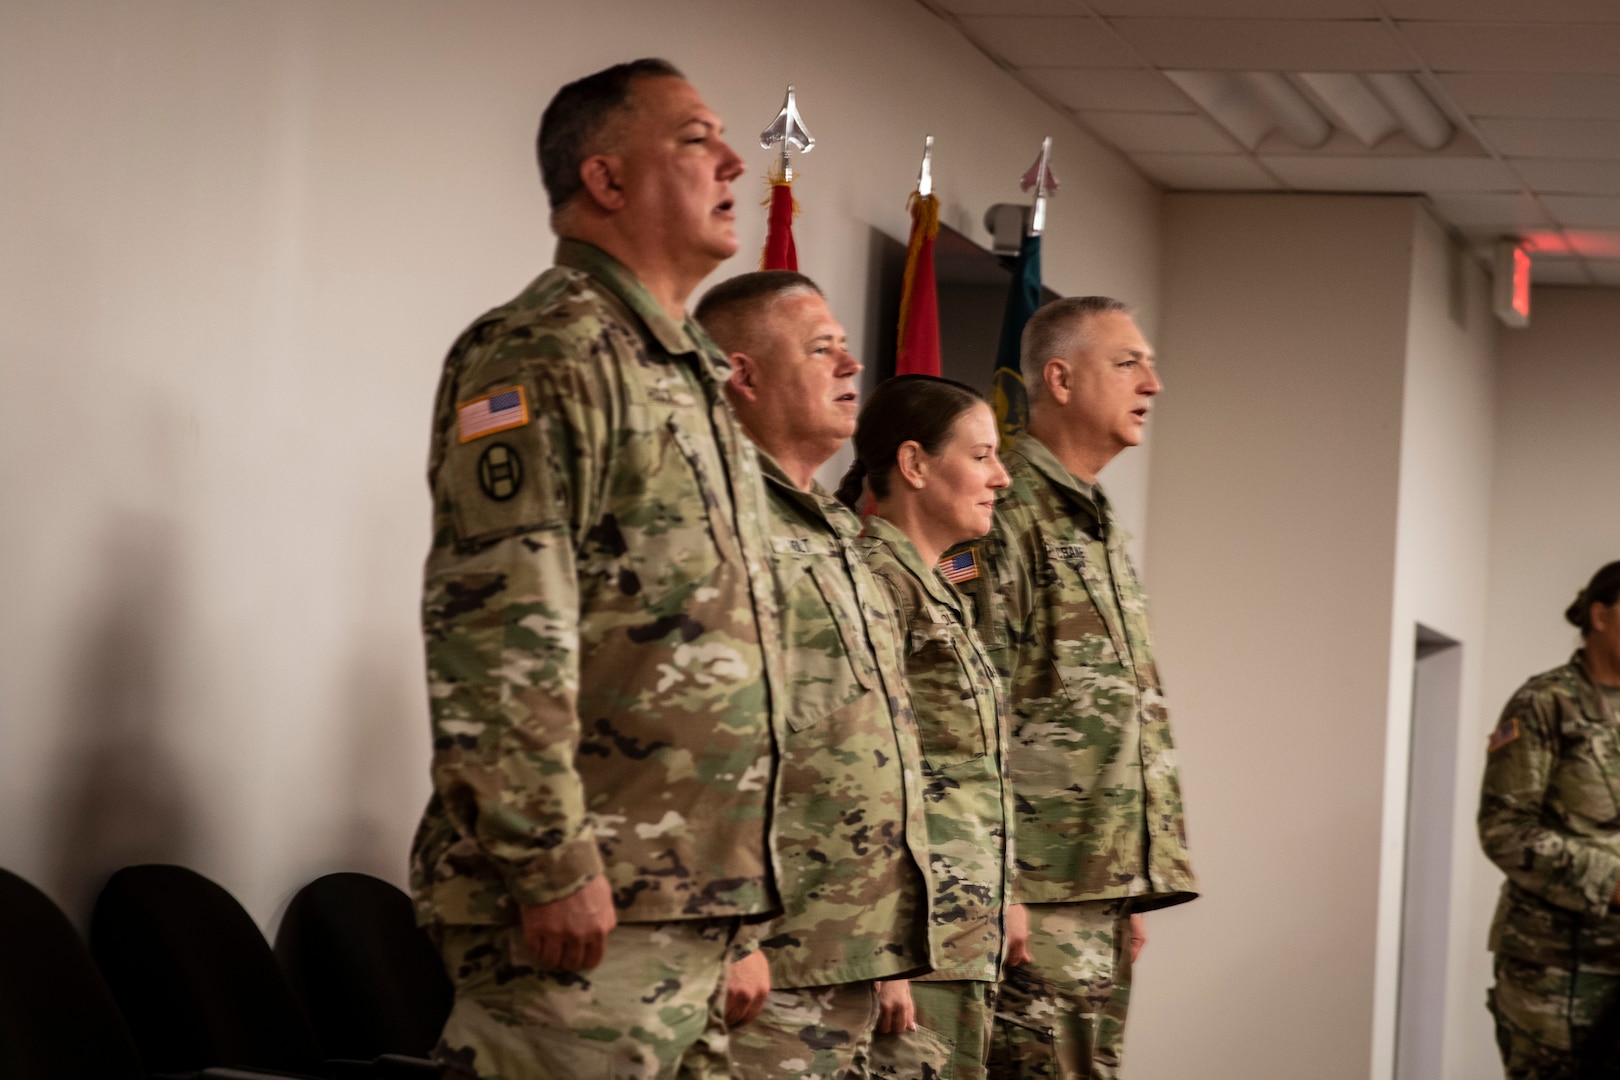 West Virginia Army National Guard Col. Mark B. Houck relinquished command of the Army Interagency Training and Education Center (AITEC) to Lt. Col. Gina M. Nichols during a ceremony at AITEC headquarters in St. Albans, West Virginia, Aug. 9, 2022. From left to right are pictures: Col. Mark B. Houck, Brig. Gen. Gene Holt,  Lt. Col. Gina M. Nichols, Maj. Gen. William Crane.